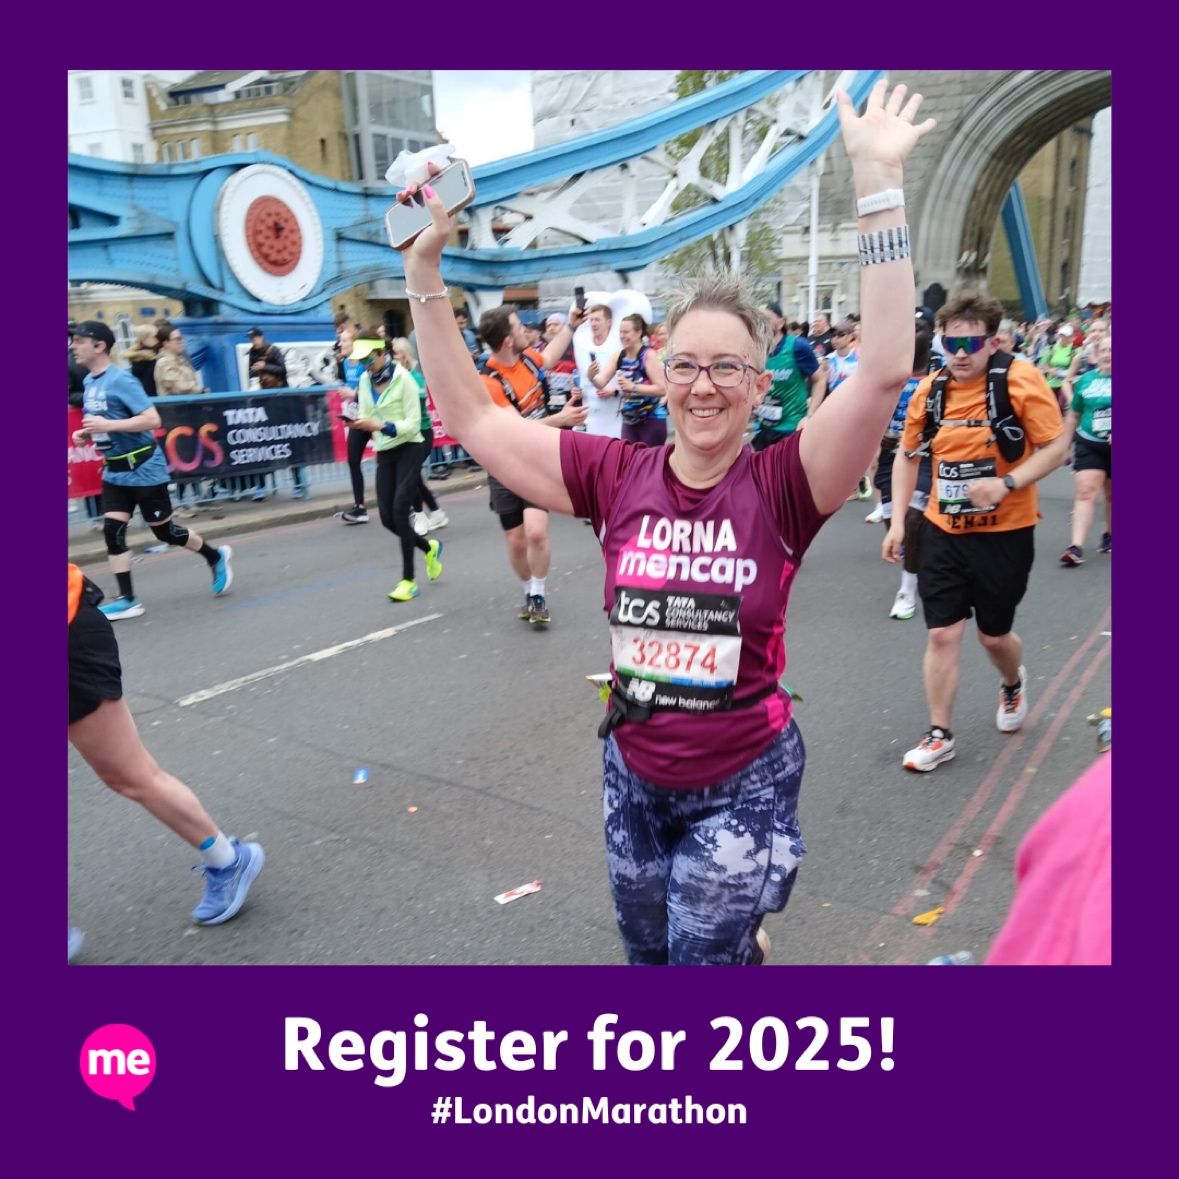 Register your interest for the 2025 TCS @LondonMarathon and run for Mencap.💜 Conquer this iconic race on Sunday 27 April with Team Mencap and raise money to support people with a learning disability. 🏃Register today: secure.mencap.org.uk/en-gb/25tcslon…